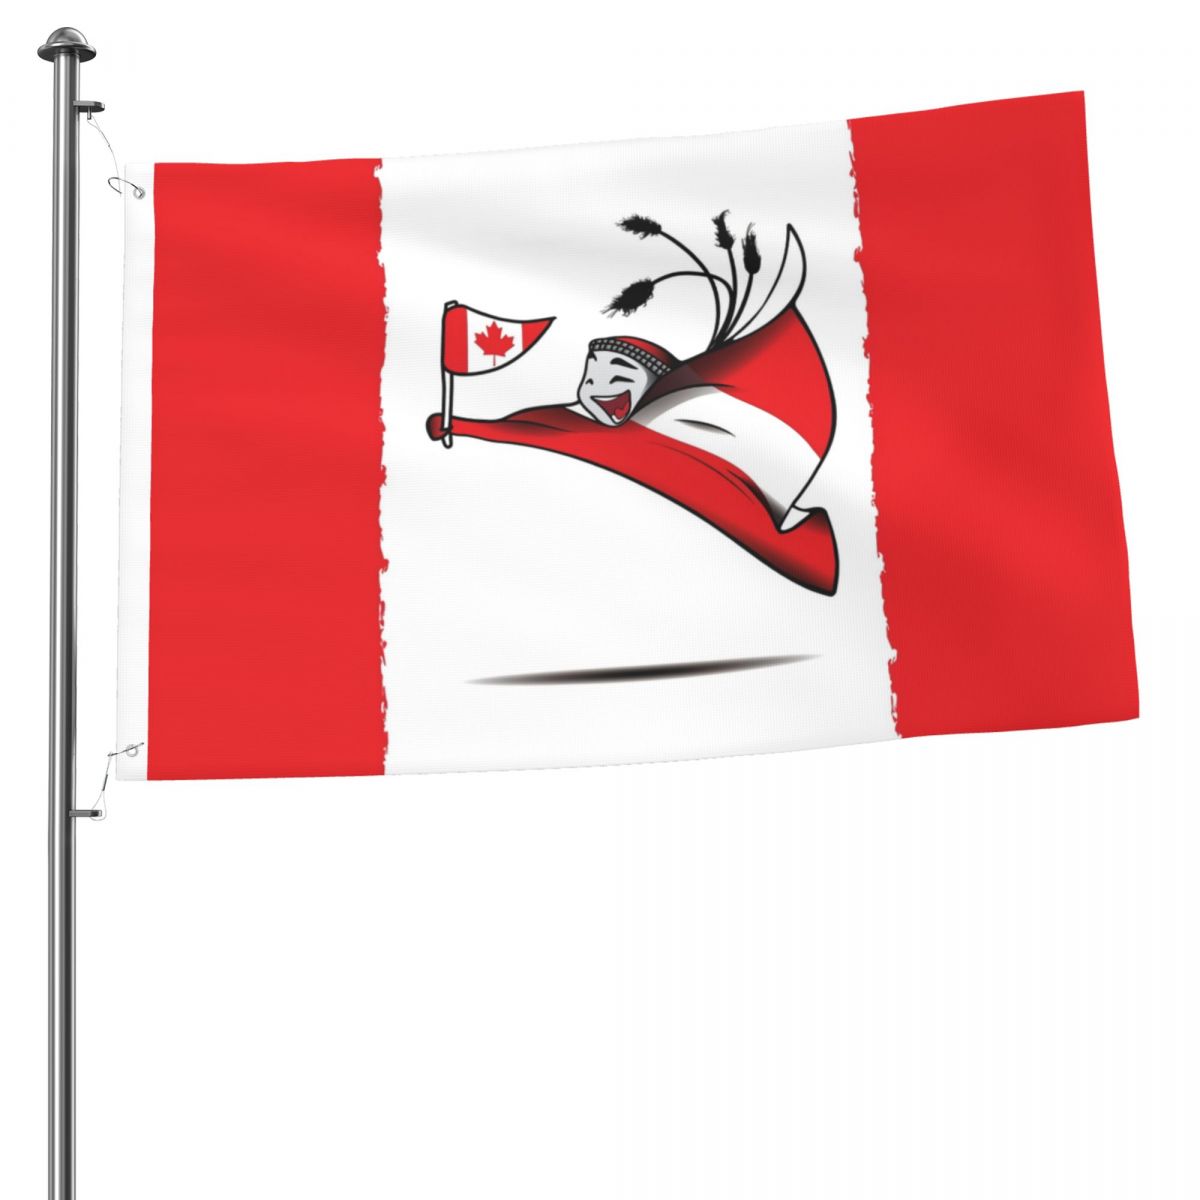 Canada World Cup 2022 Mascot 2x3 FT UV Resistant Flag